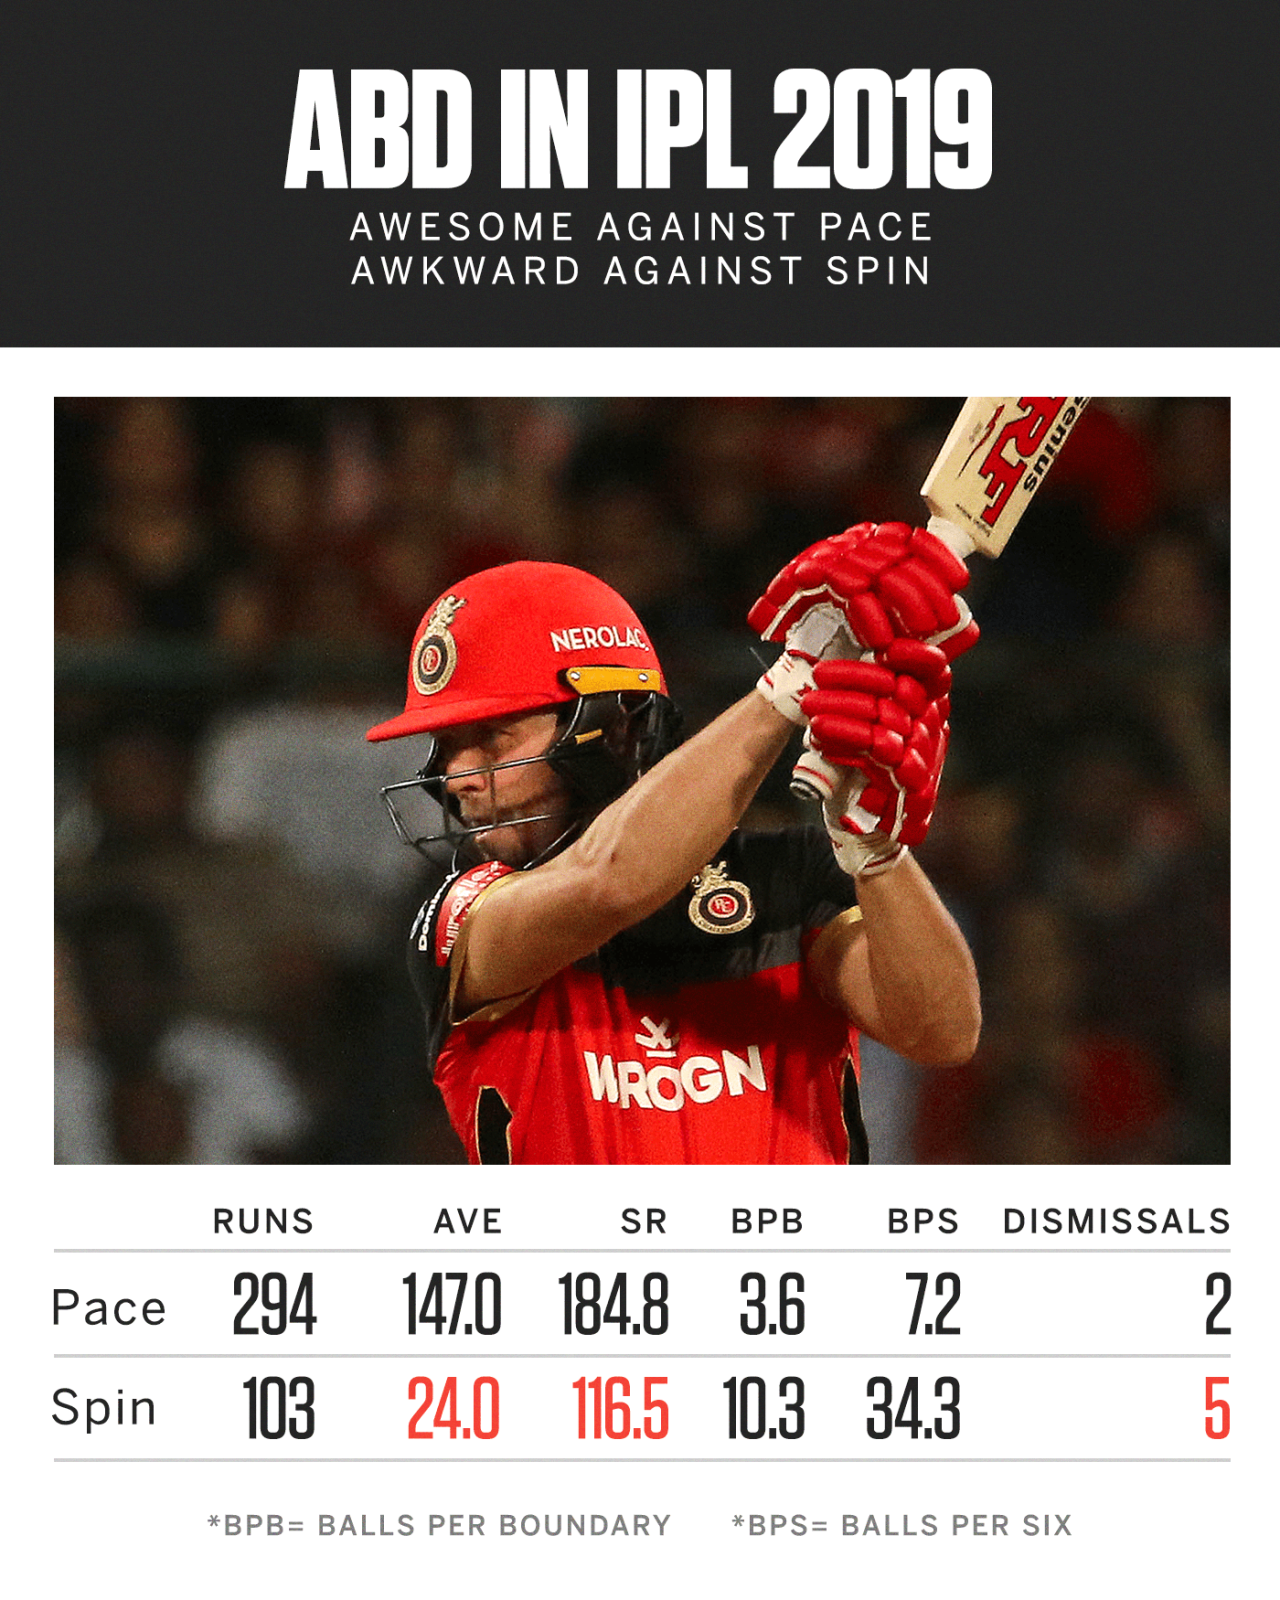 AB de Villiers hasn't had a great time against spin in IPL 2019